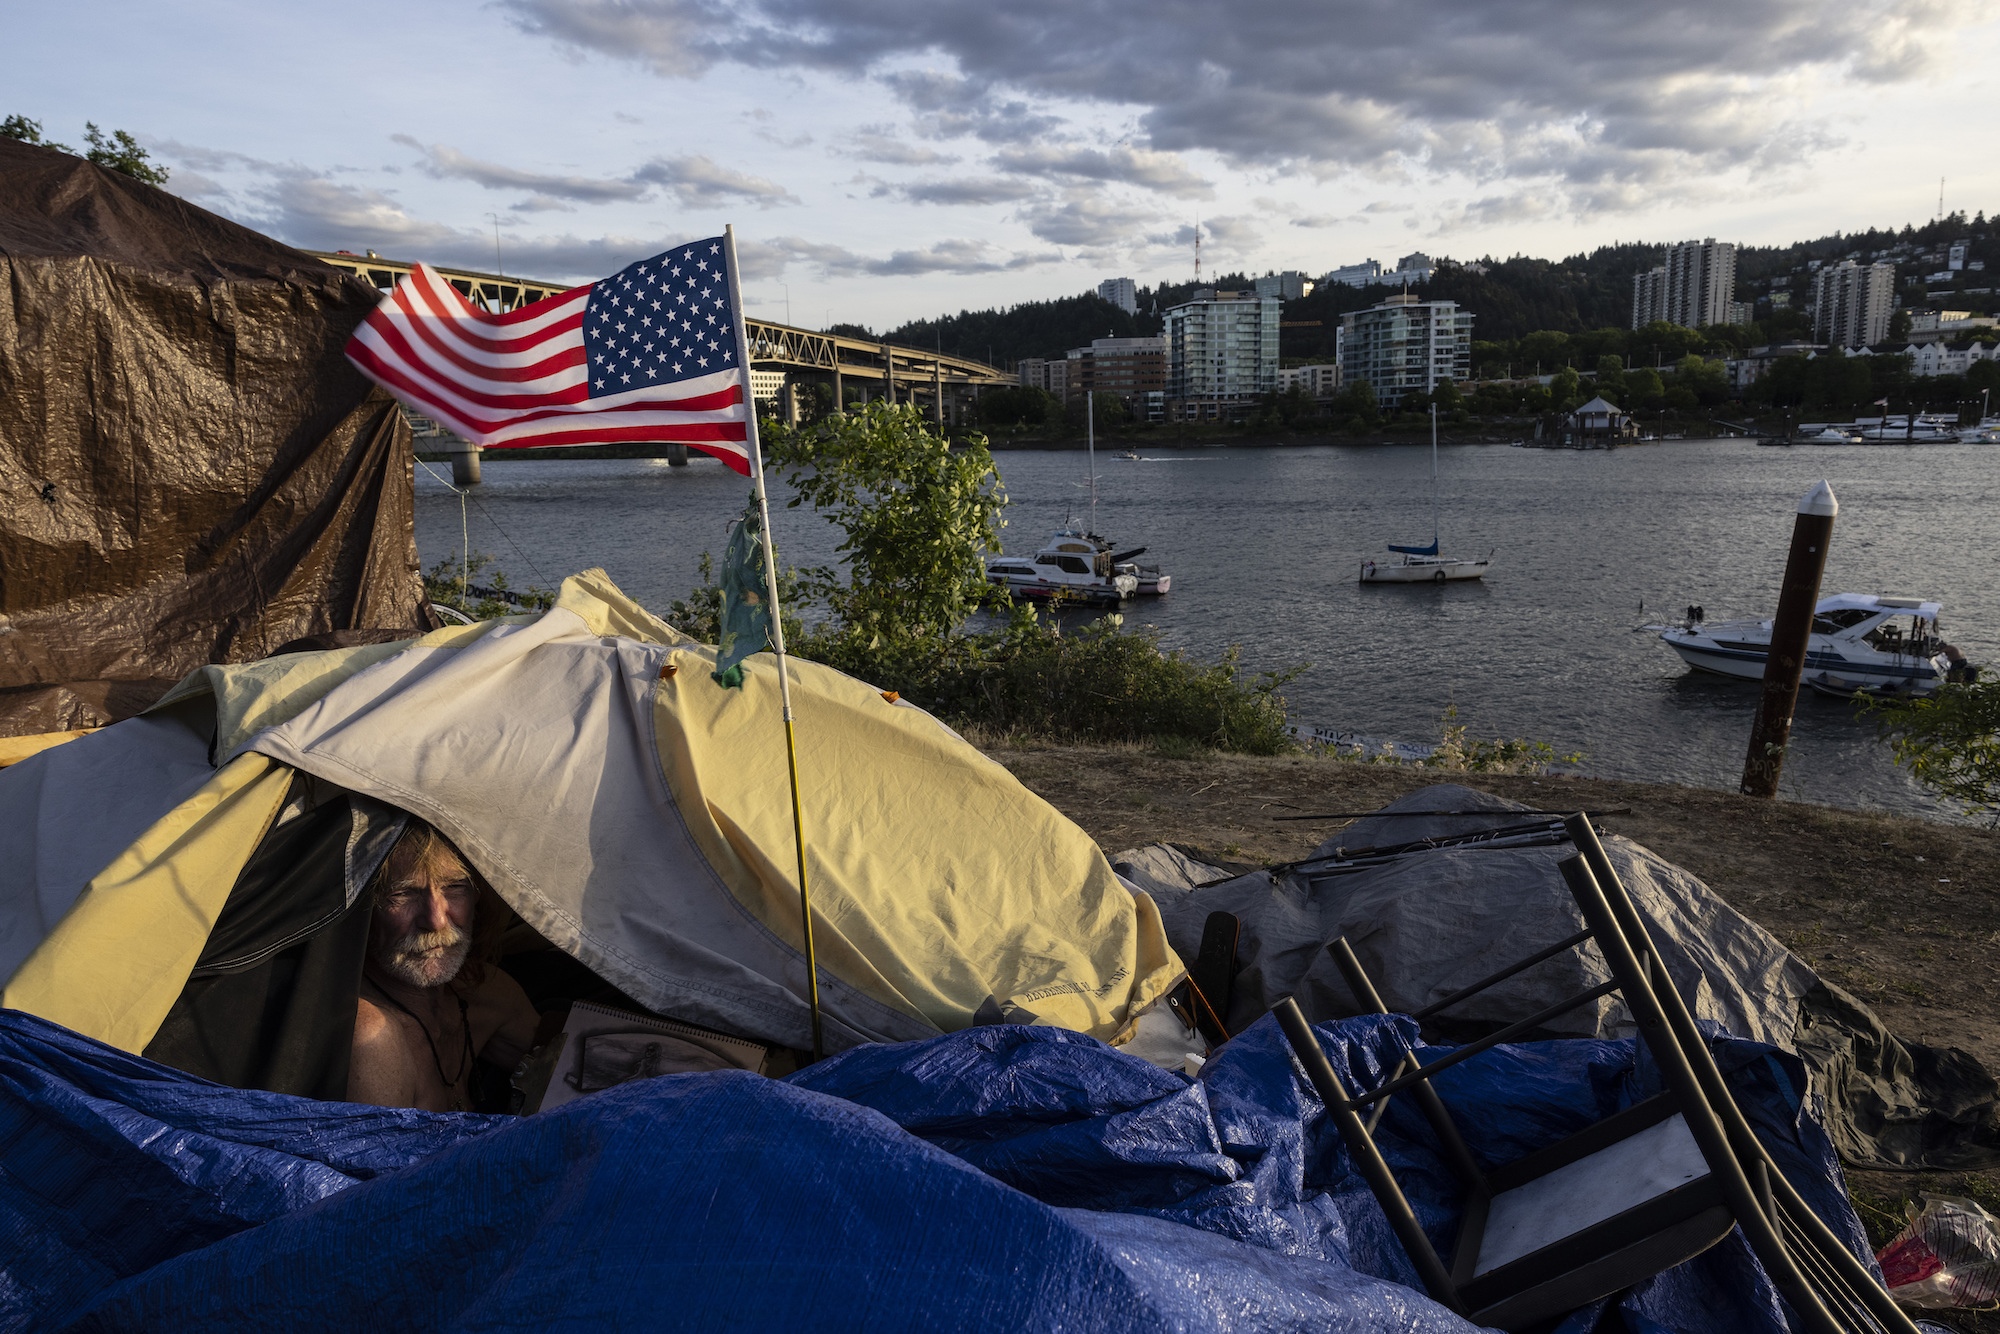 a bearded man in a yellow tent with blue tarp looks out of the flap. Outside of the tent is an American flag. The tent is on a beach with houses in the background and boats in the water.